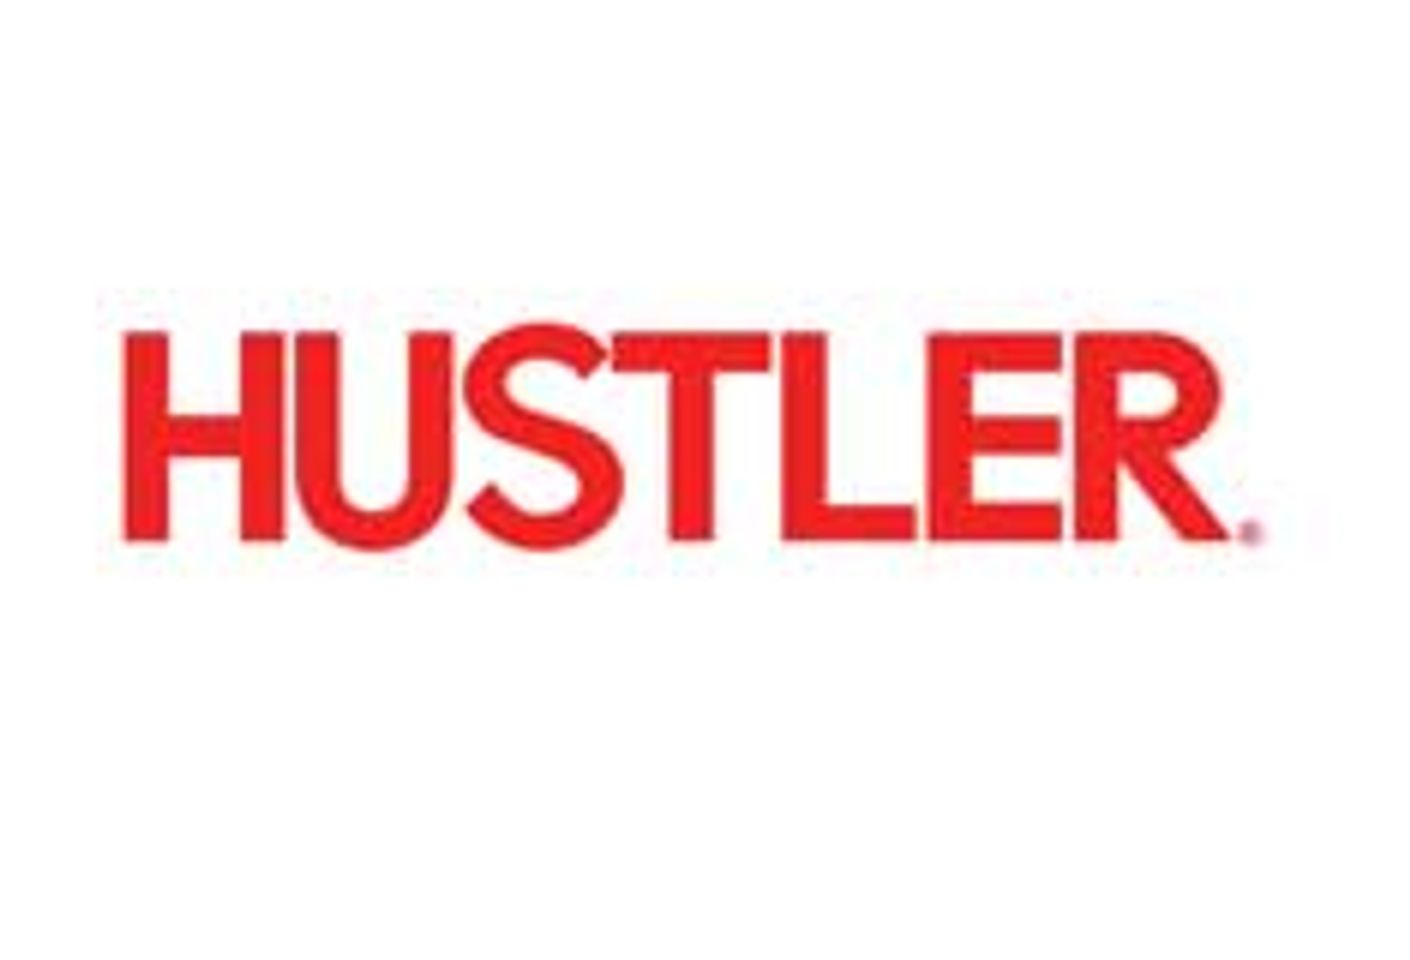 Komar Company Now Offering Hustler ‘Pussies’